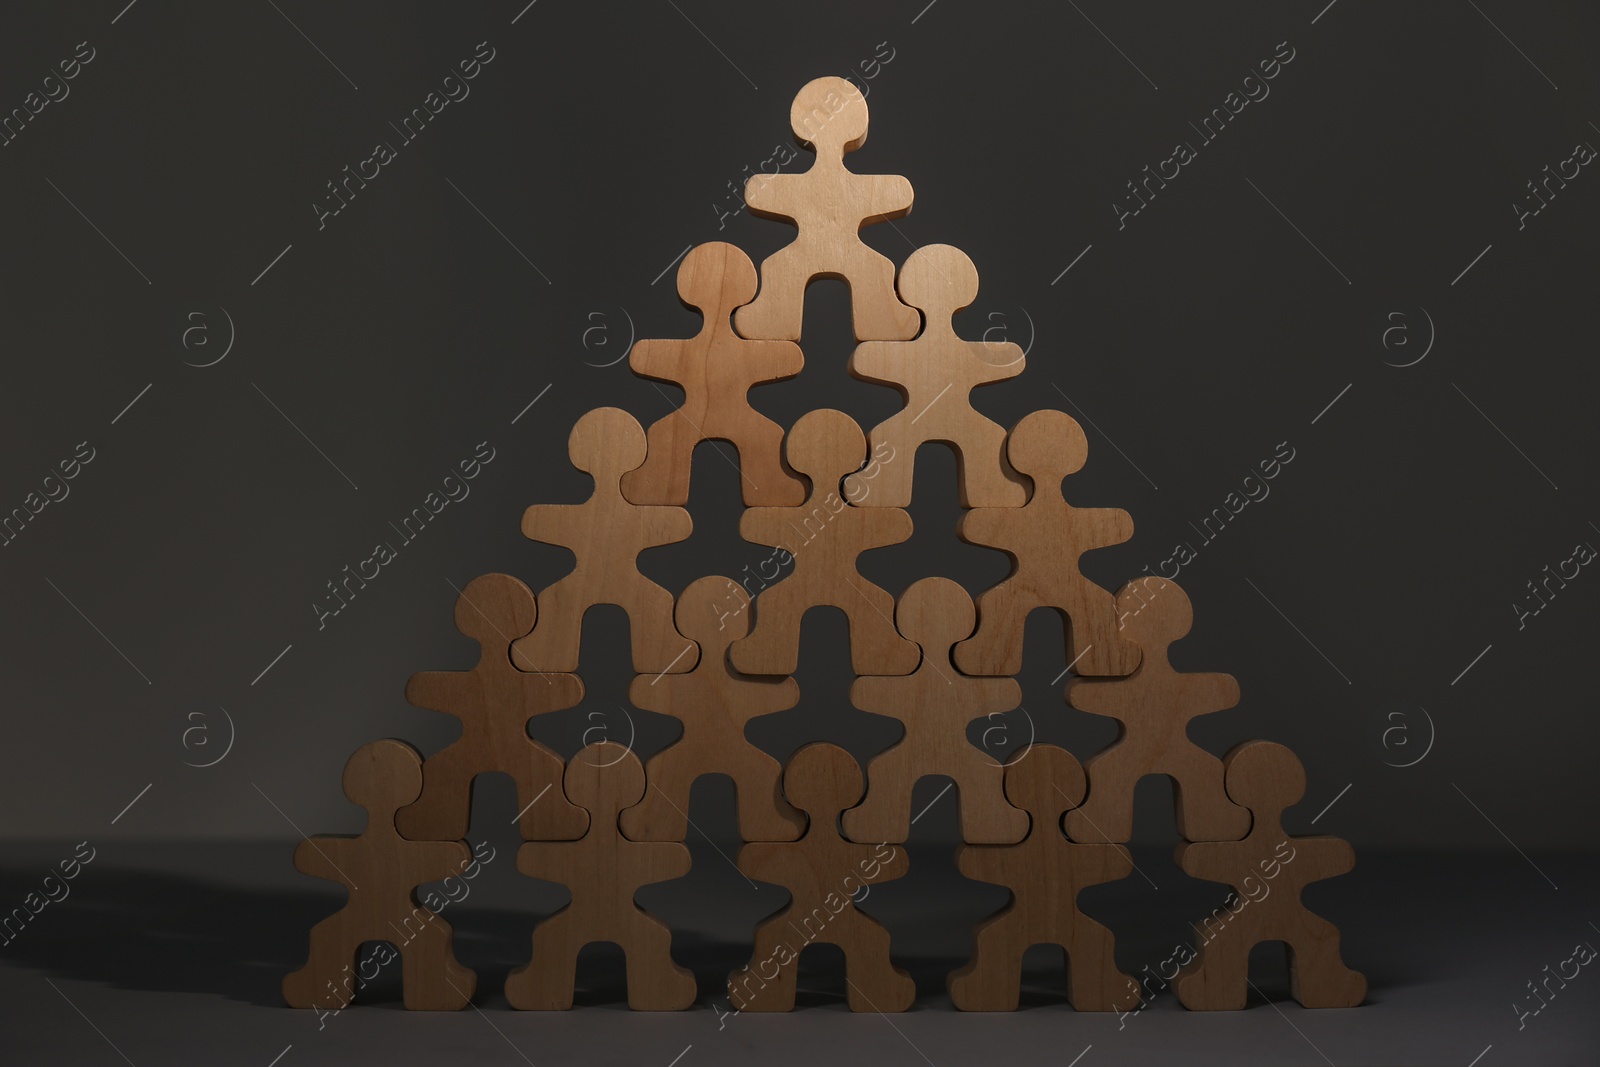 Photo of Recruitment process, job competition concept. Pyramid of wooden human figures with noticeable one on top as prime applicant on grey table